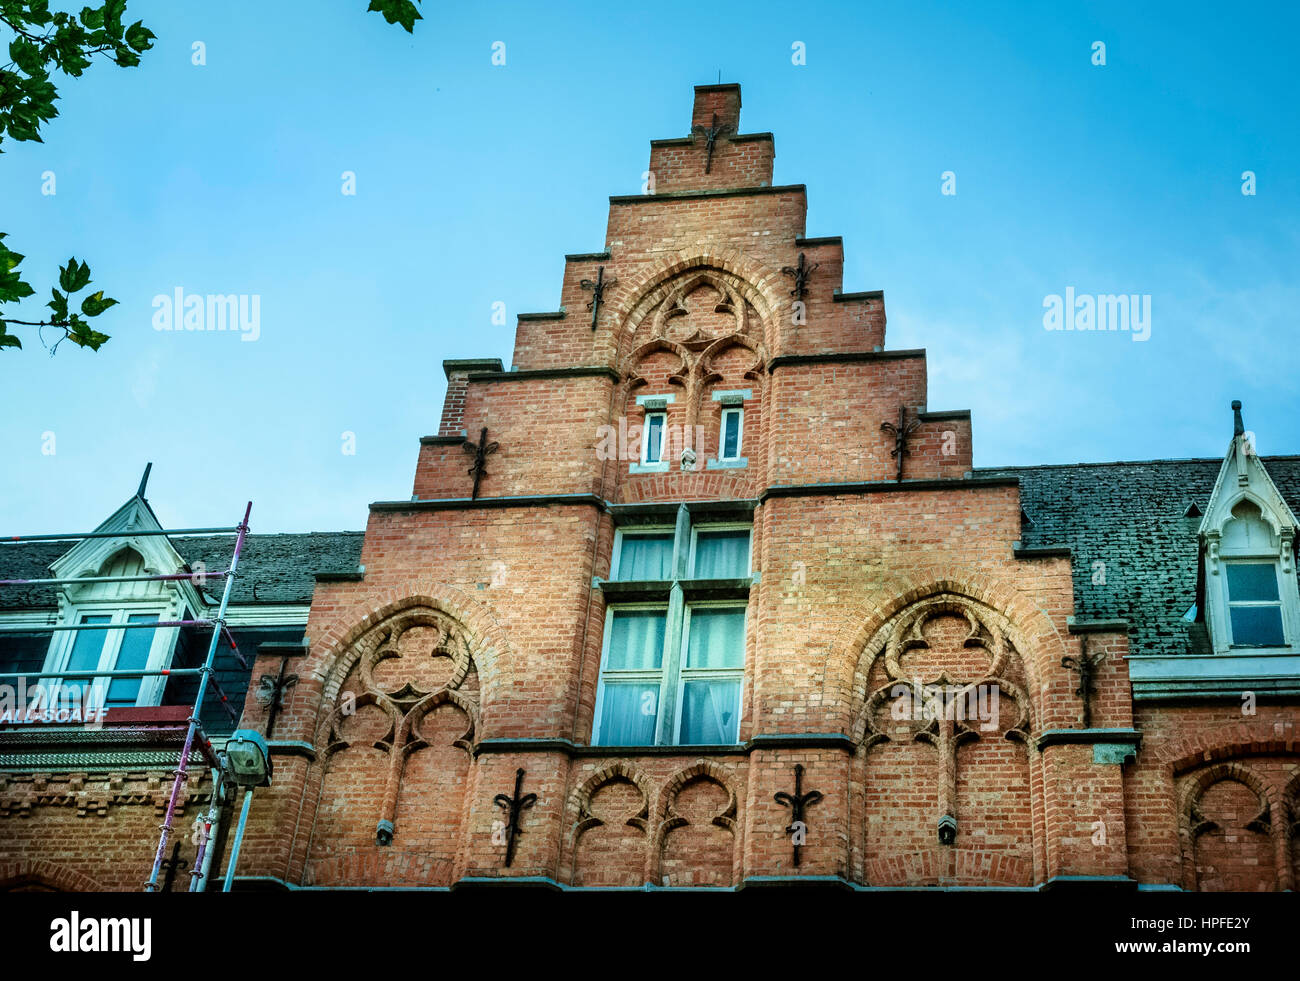 Interesting architecture in the Flemish influence of roofline design Stock Photo